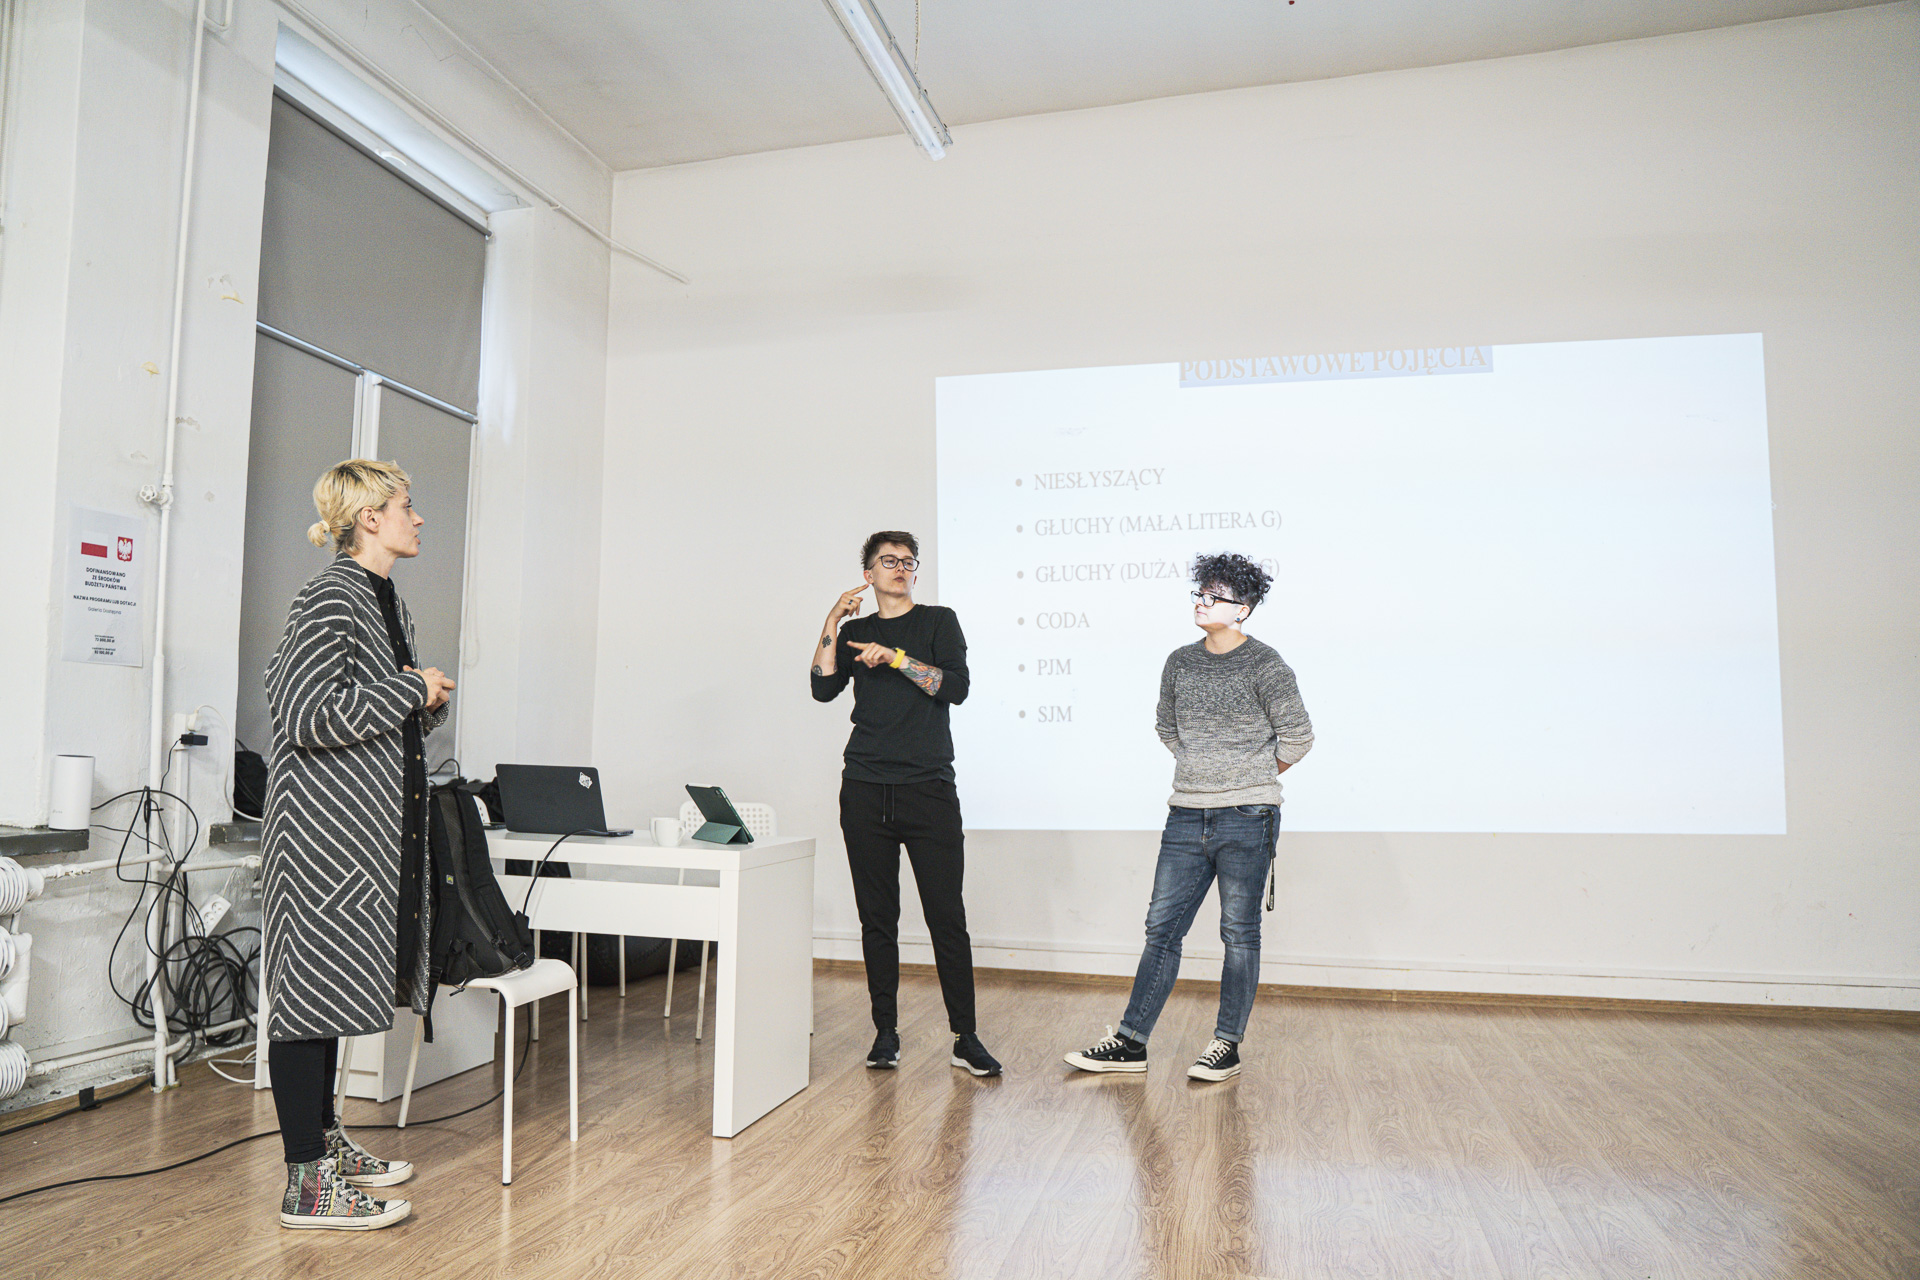 Training course in accessibility for d/Deaf people. Conducted by Aleksandra Palacz and Wioletta Stepniak, October 2021